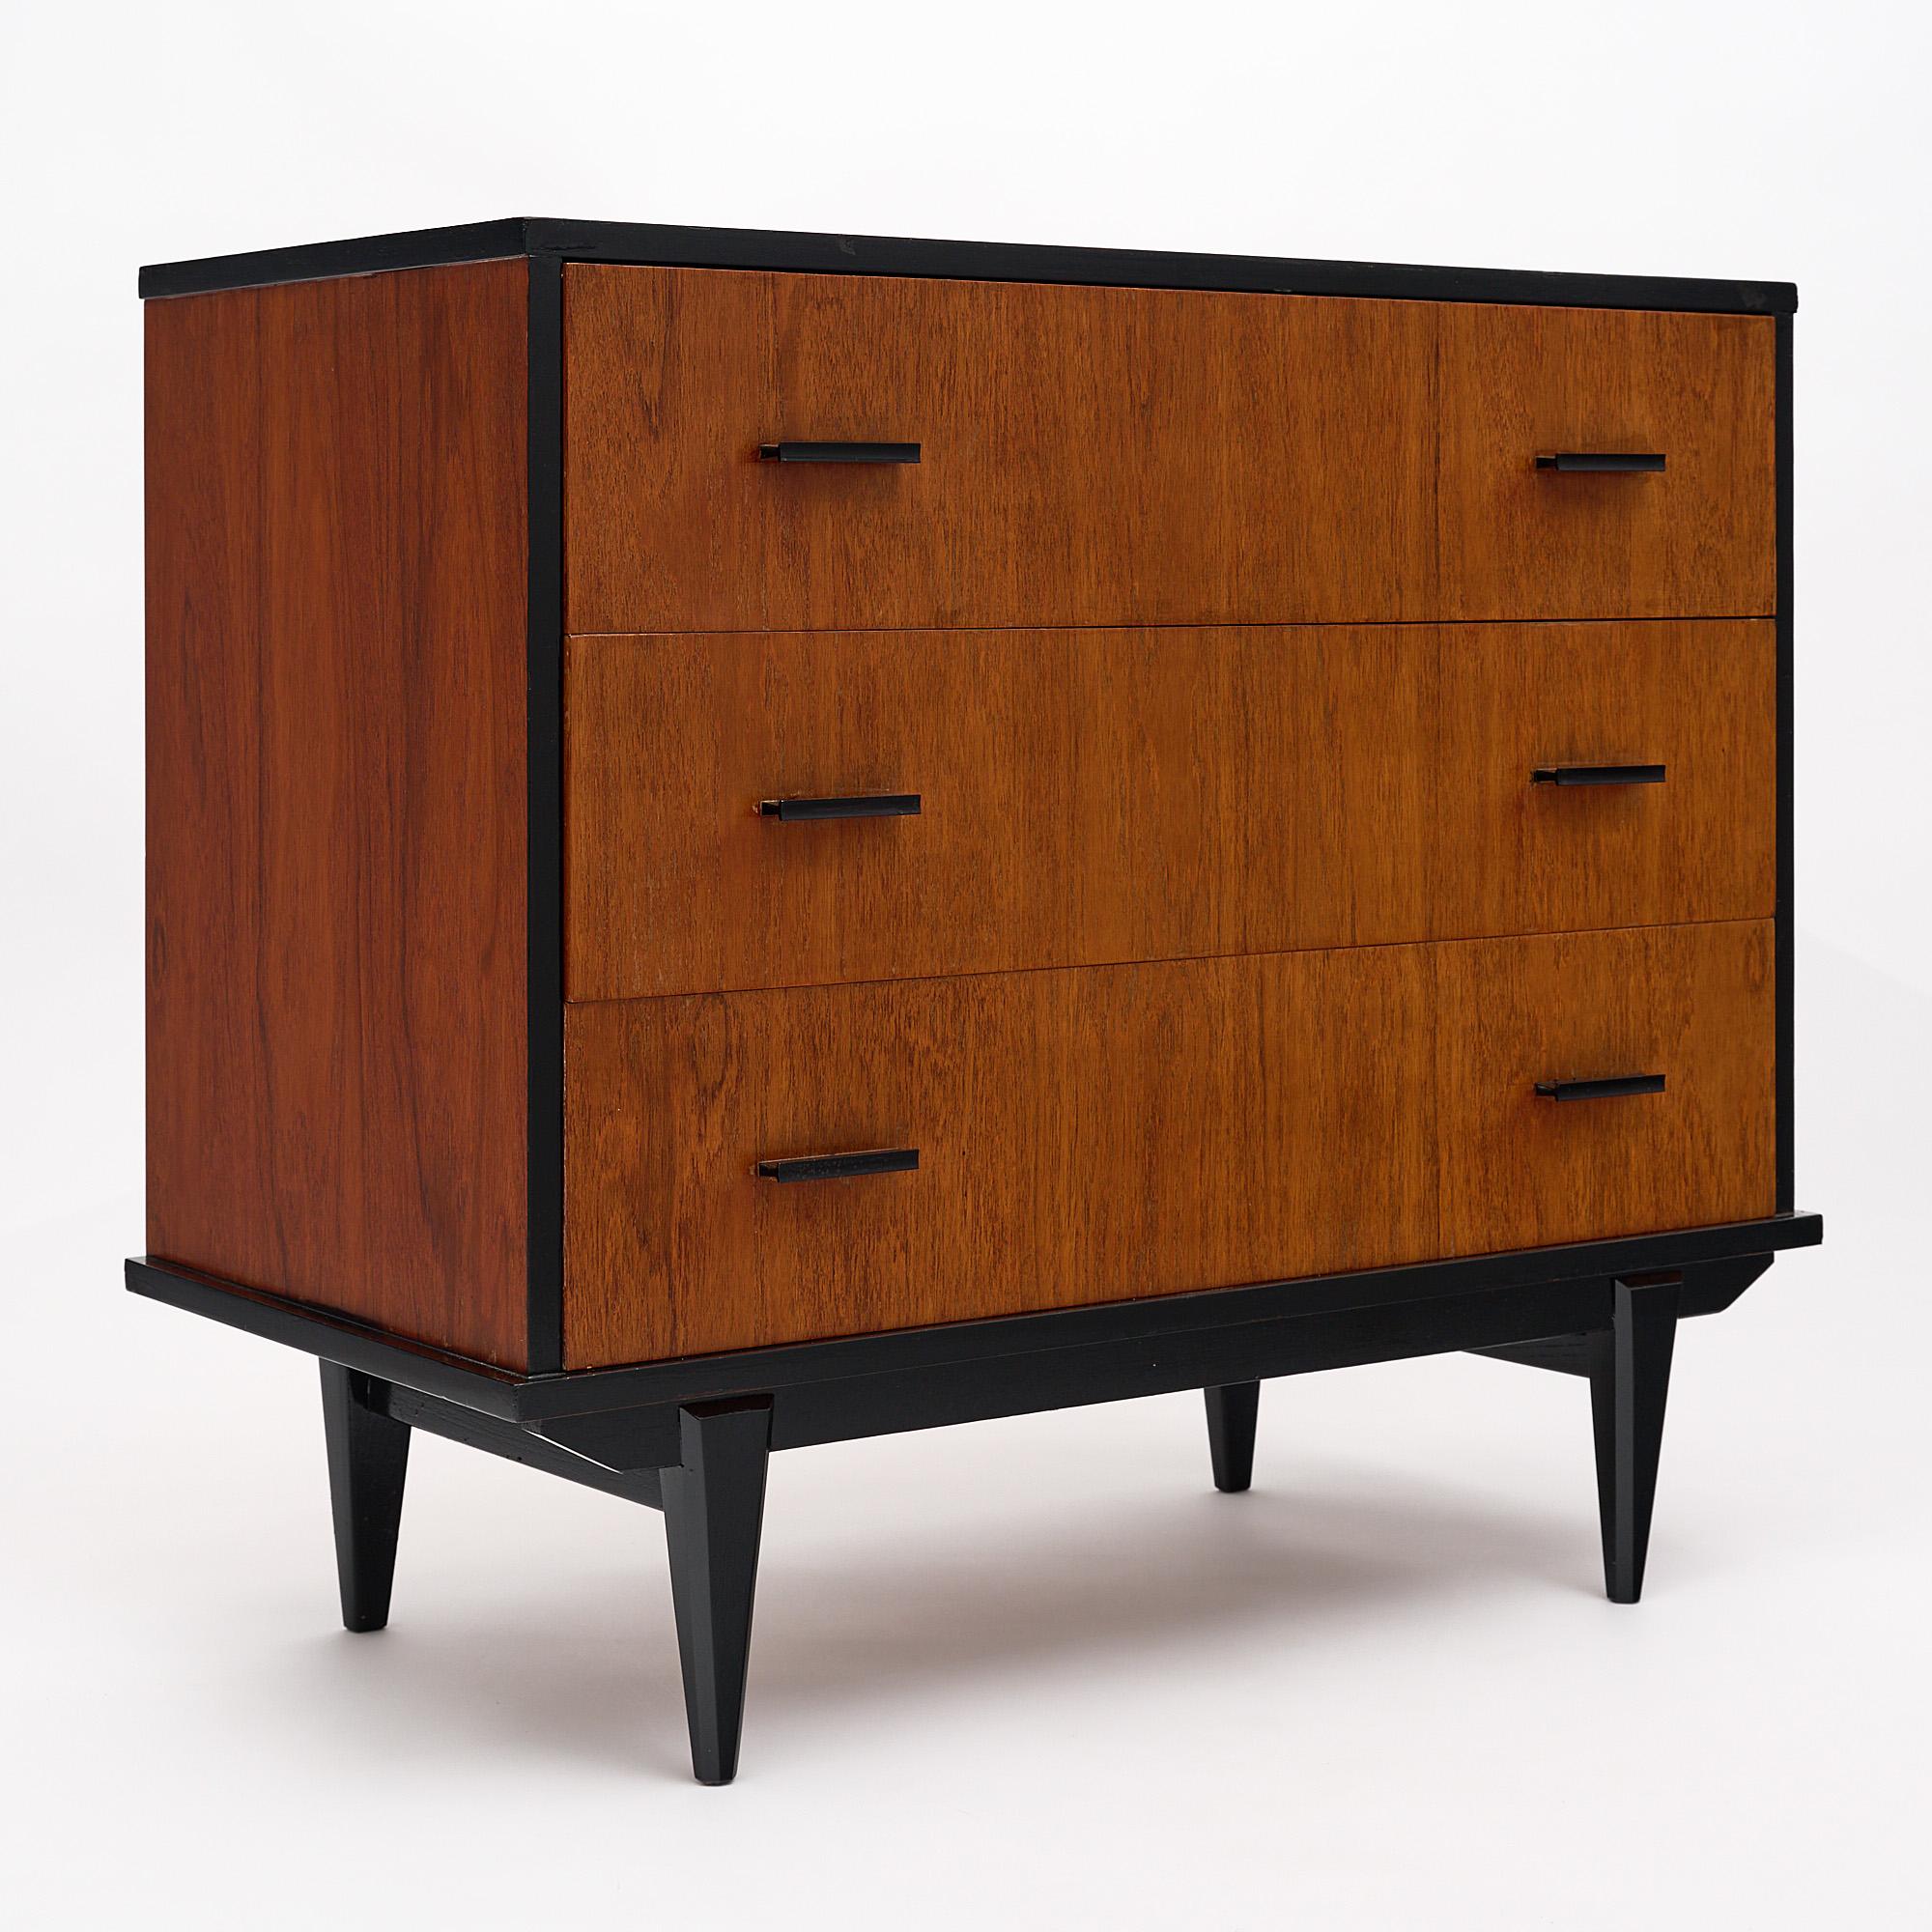 Chest, Italian, Mid-Century Modern made of teak with an ebonized trim and top. There are four tapered legs and three drawers.